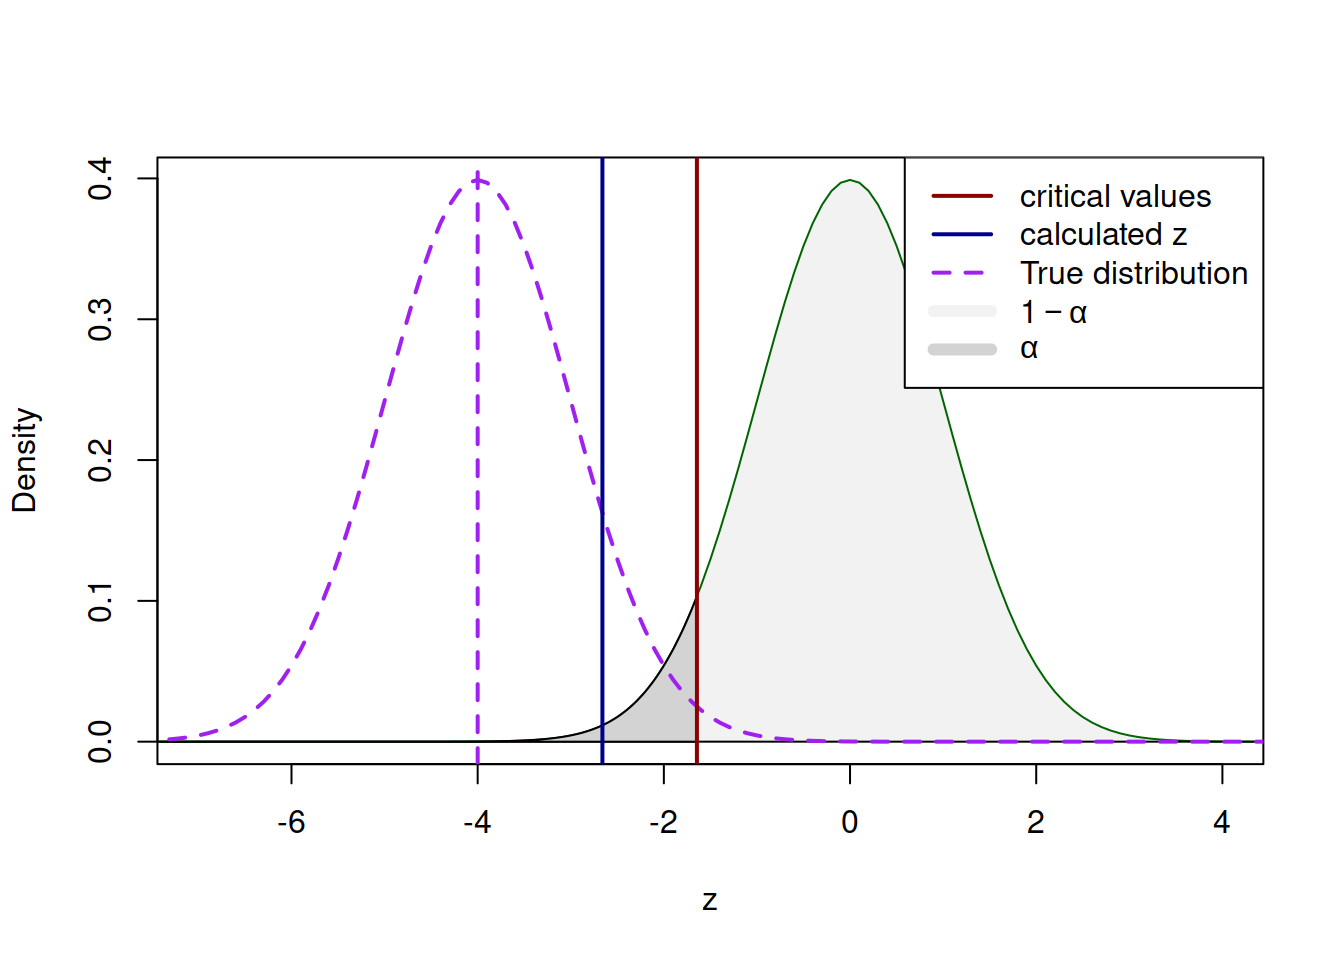 Hypothetical "true" and the assumed distributions.